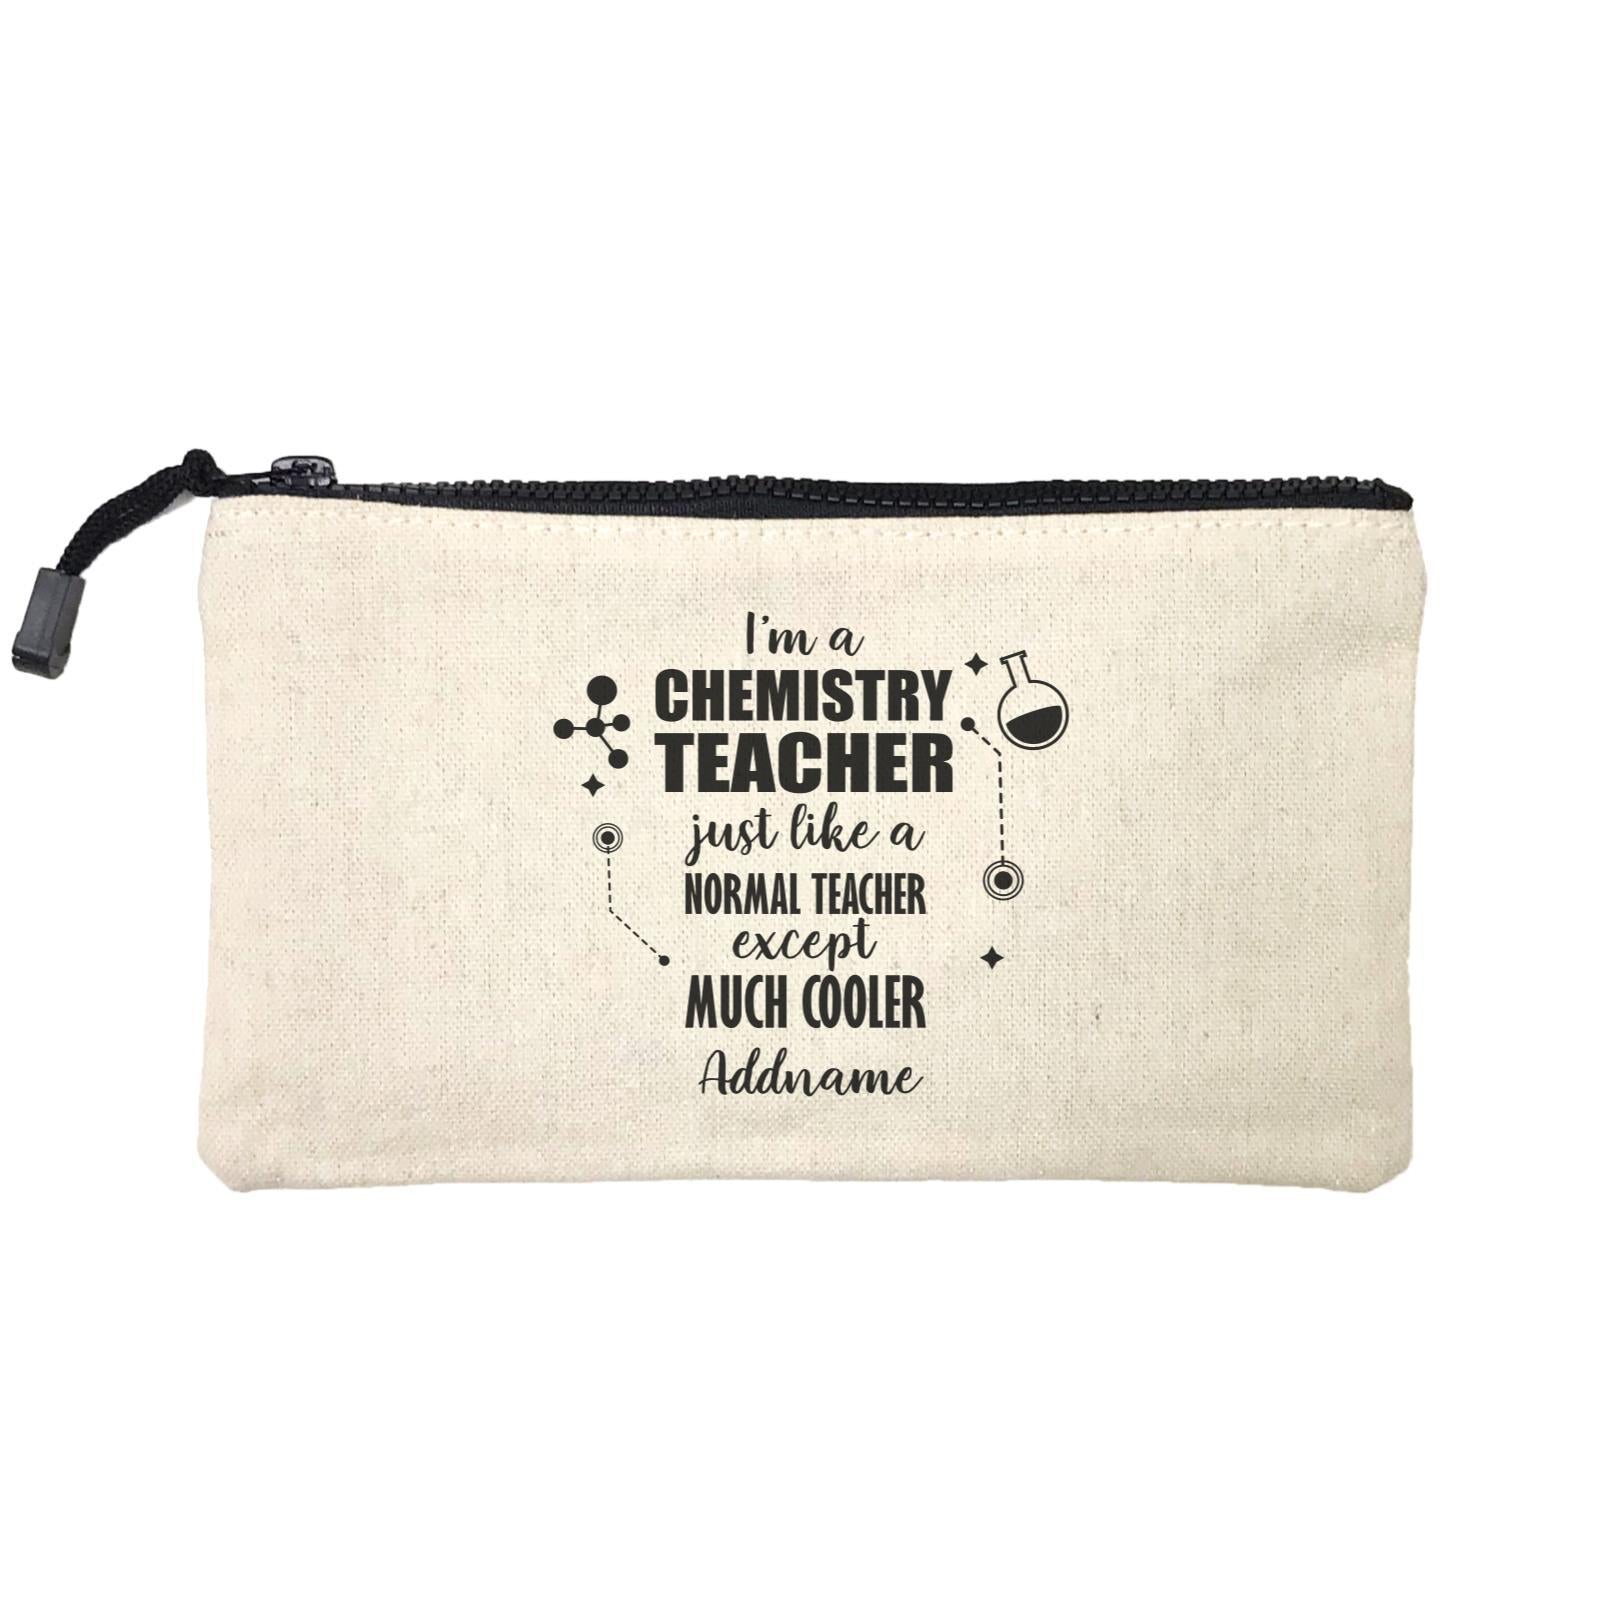 Subject Teachers 2 I'm A Chemistry Teacher Addname Mini Accessories Stationery Pouch